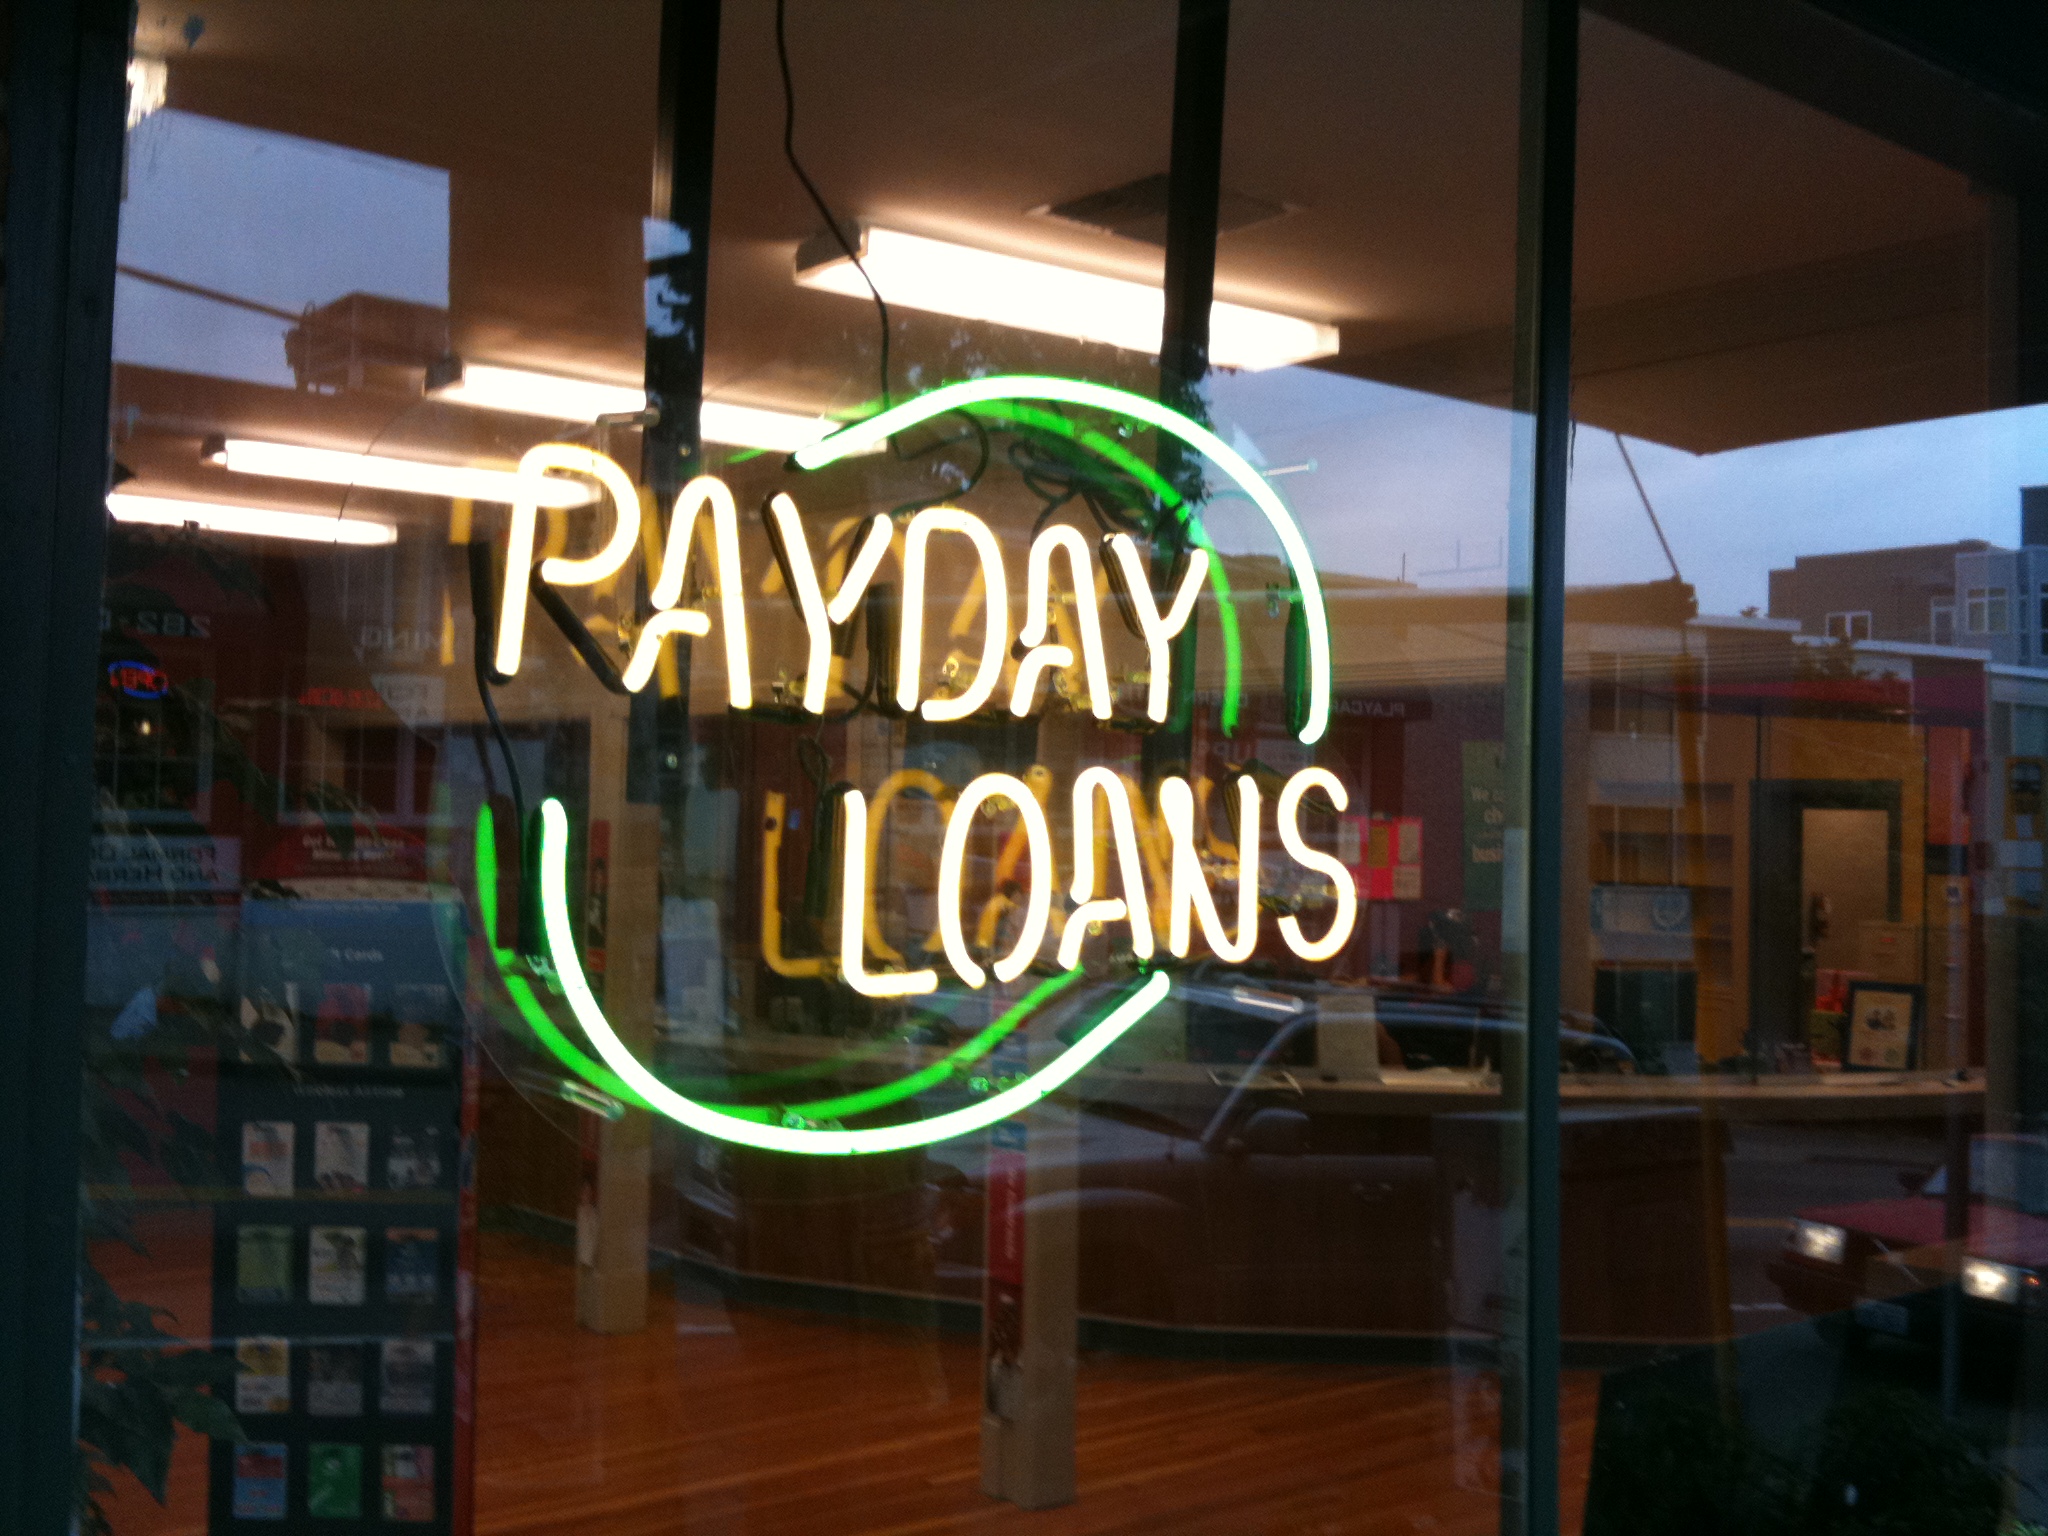 Payday Loans sign